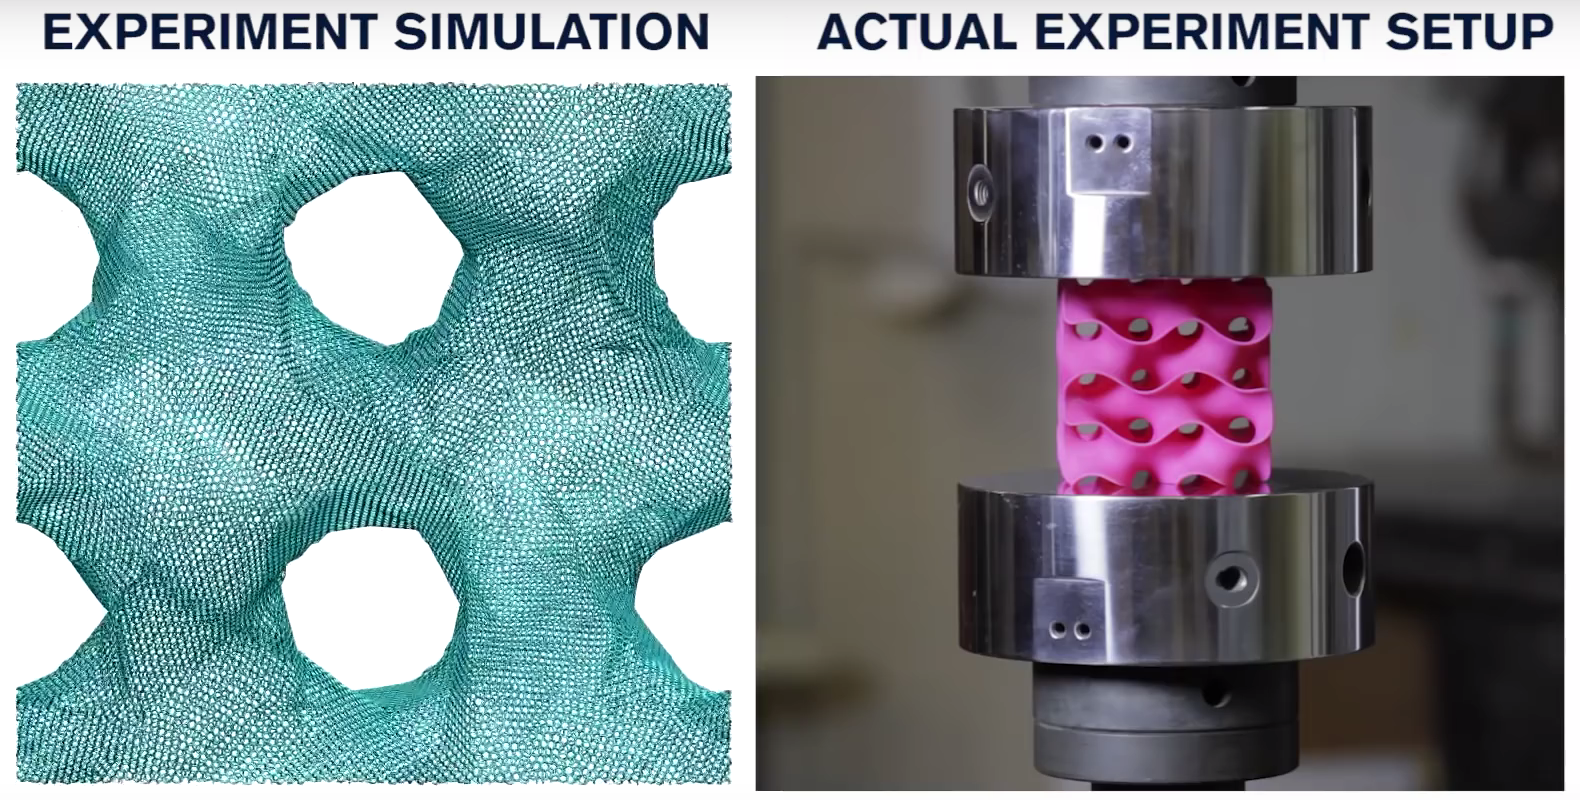 Three-dimensional graphene gyroid shapes were assessed in computer simulations while scaled-up plastic models were subjected to actual compression testing. Source: Massachusetts Institute of Technology